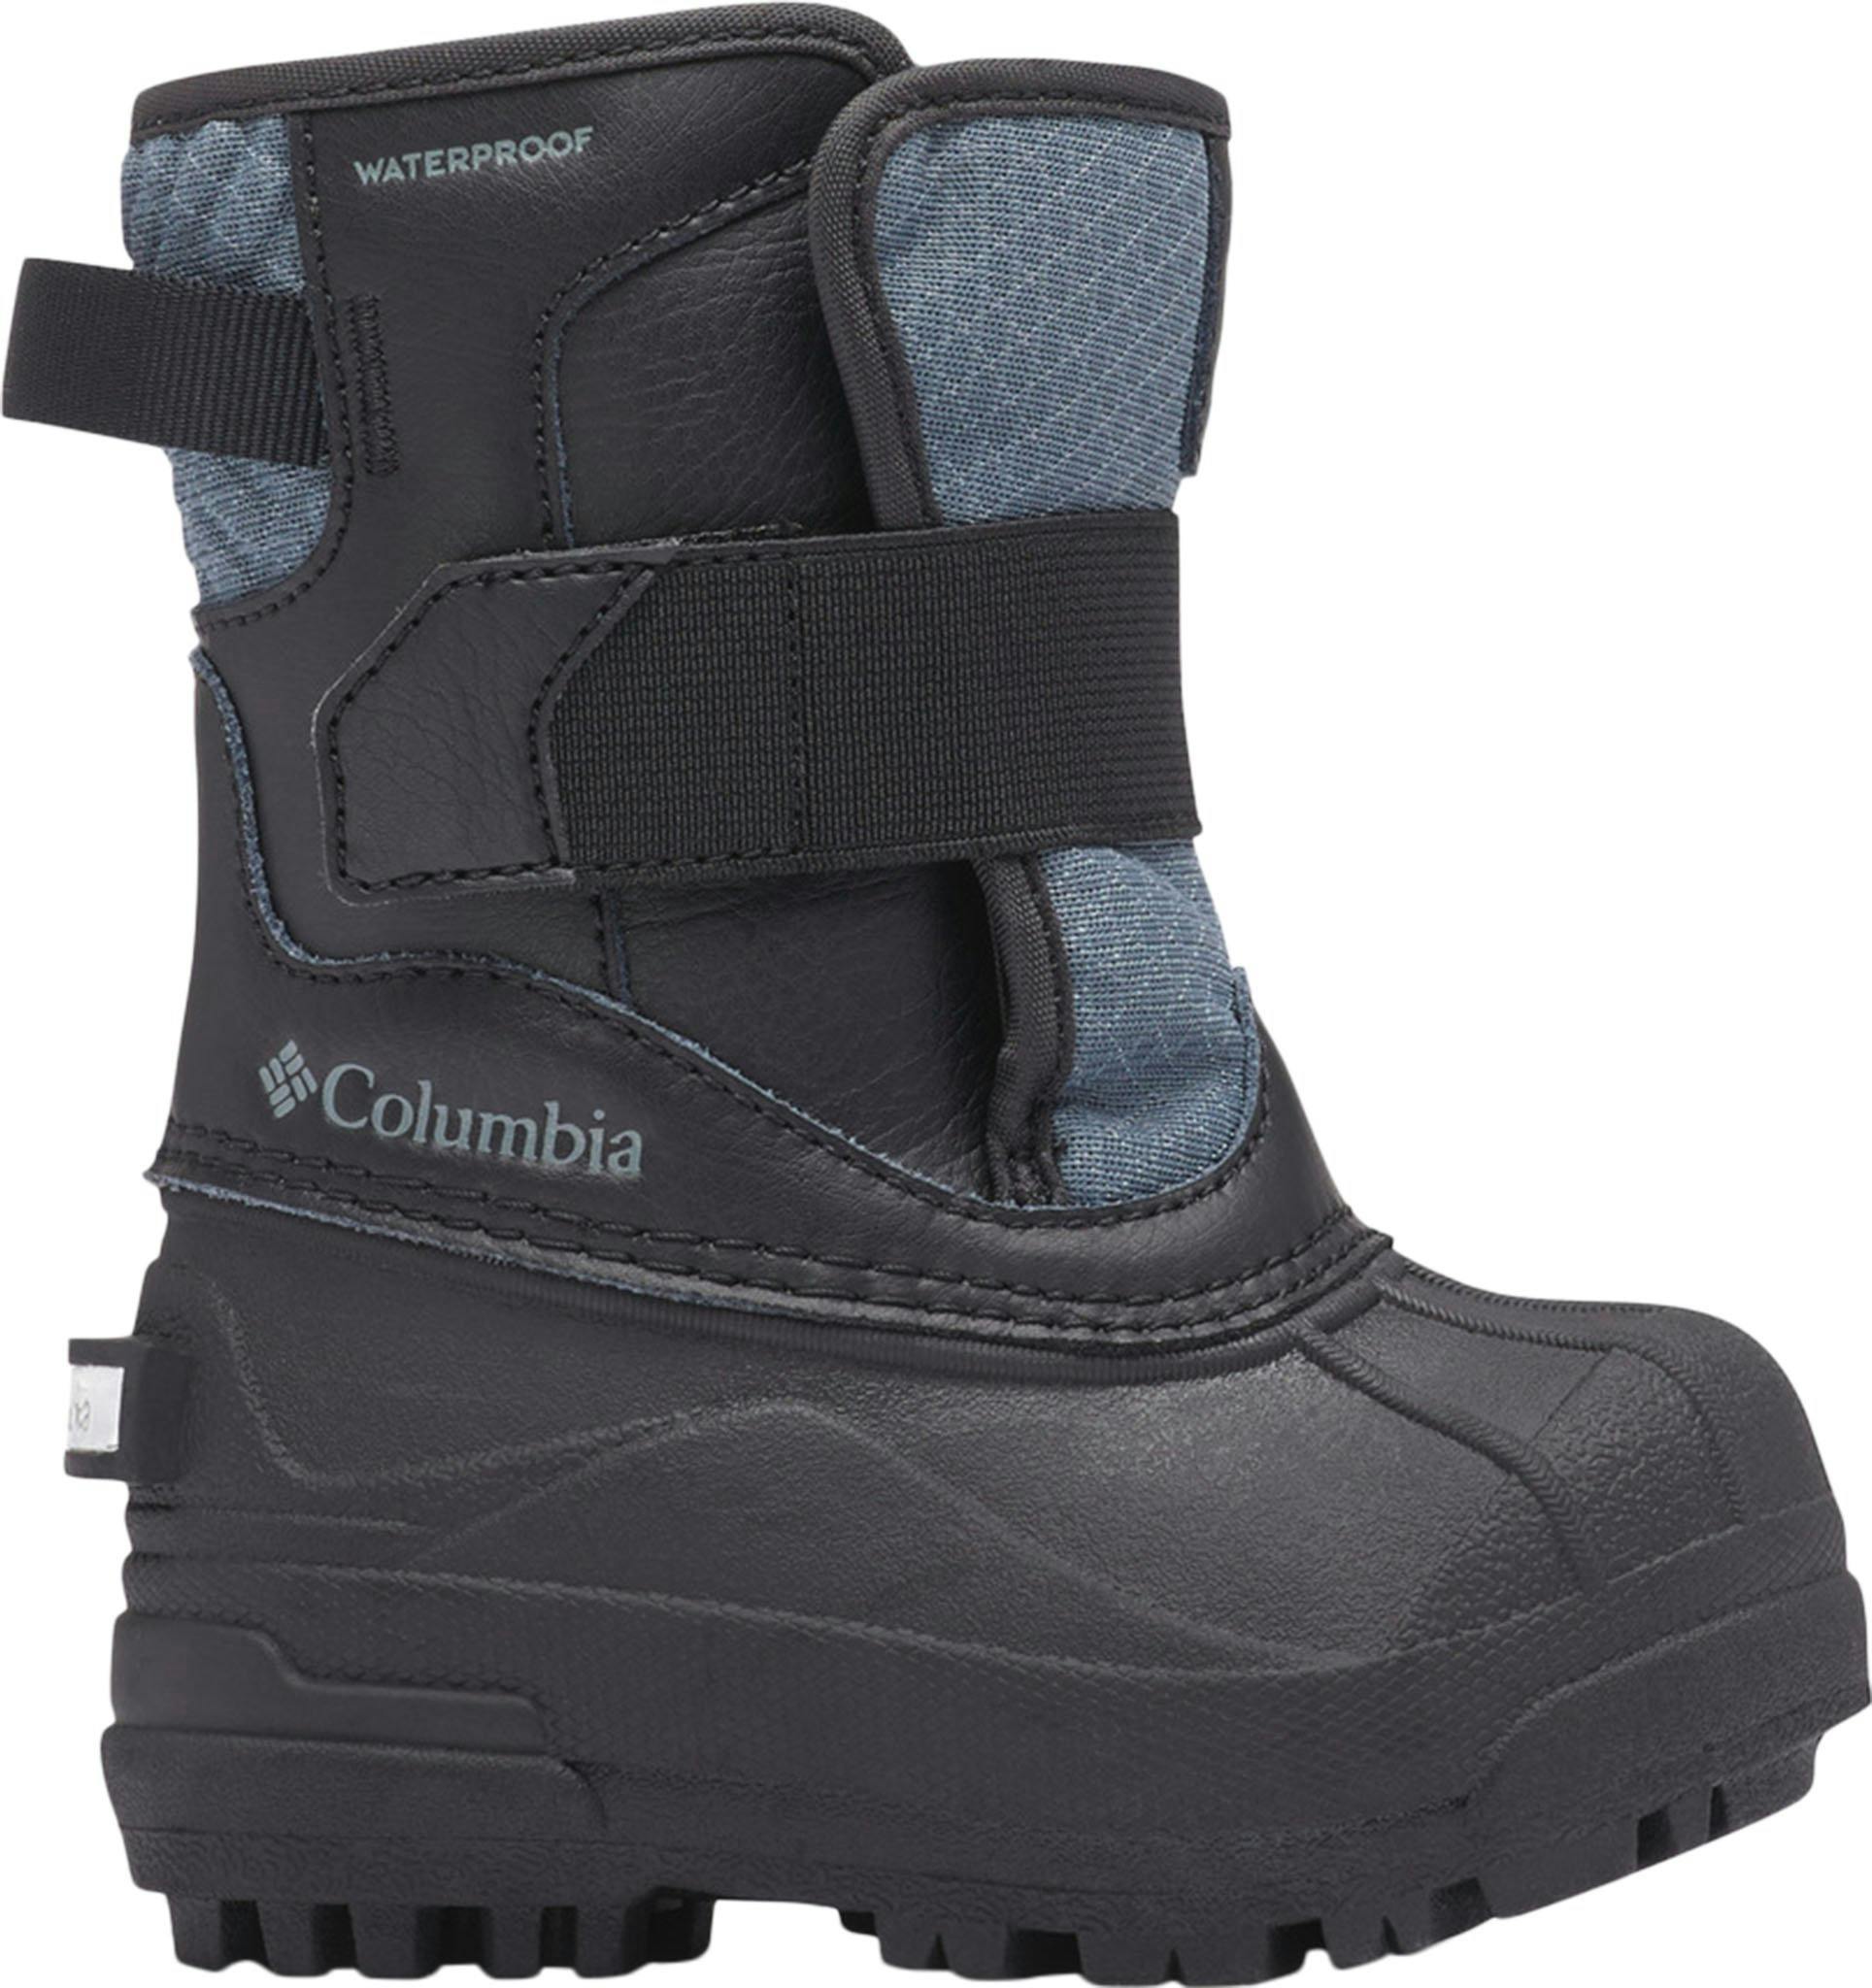 Product image for Bugaboot Celsius Winter Boots - Toddler